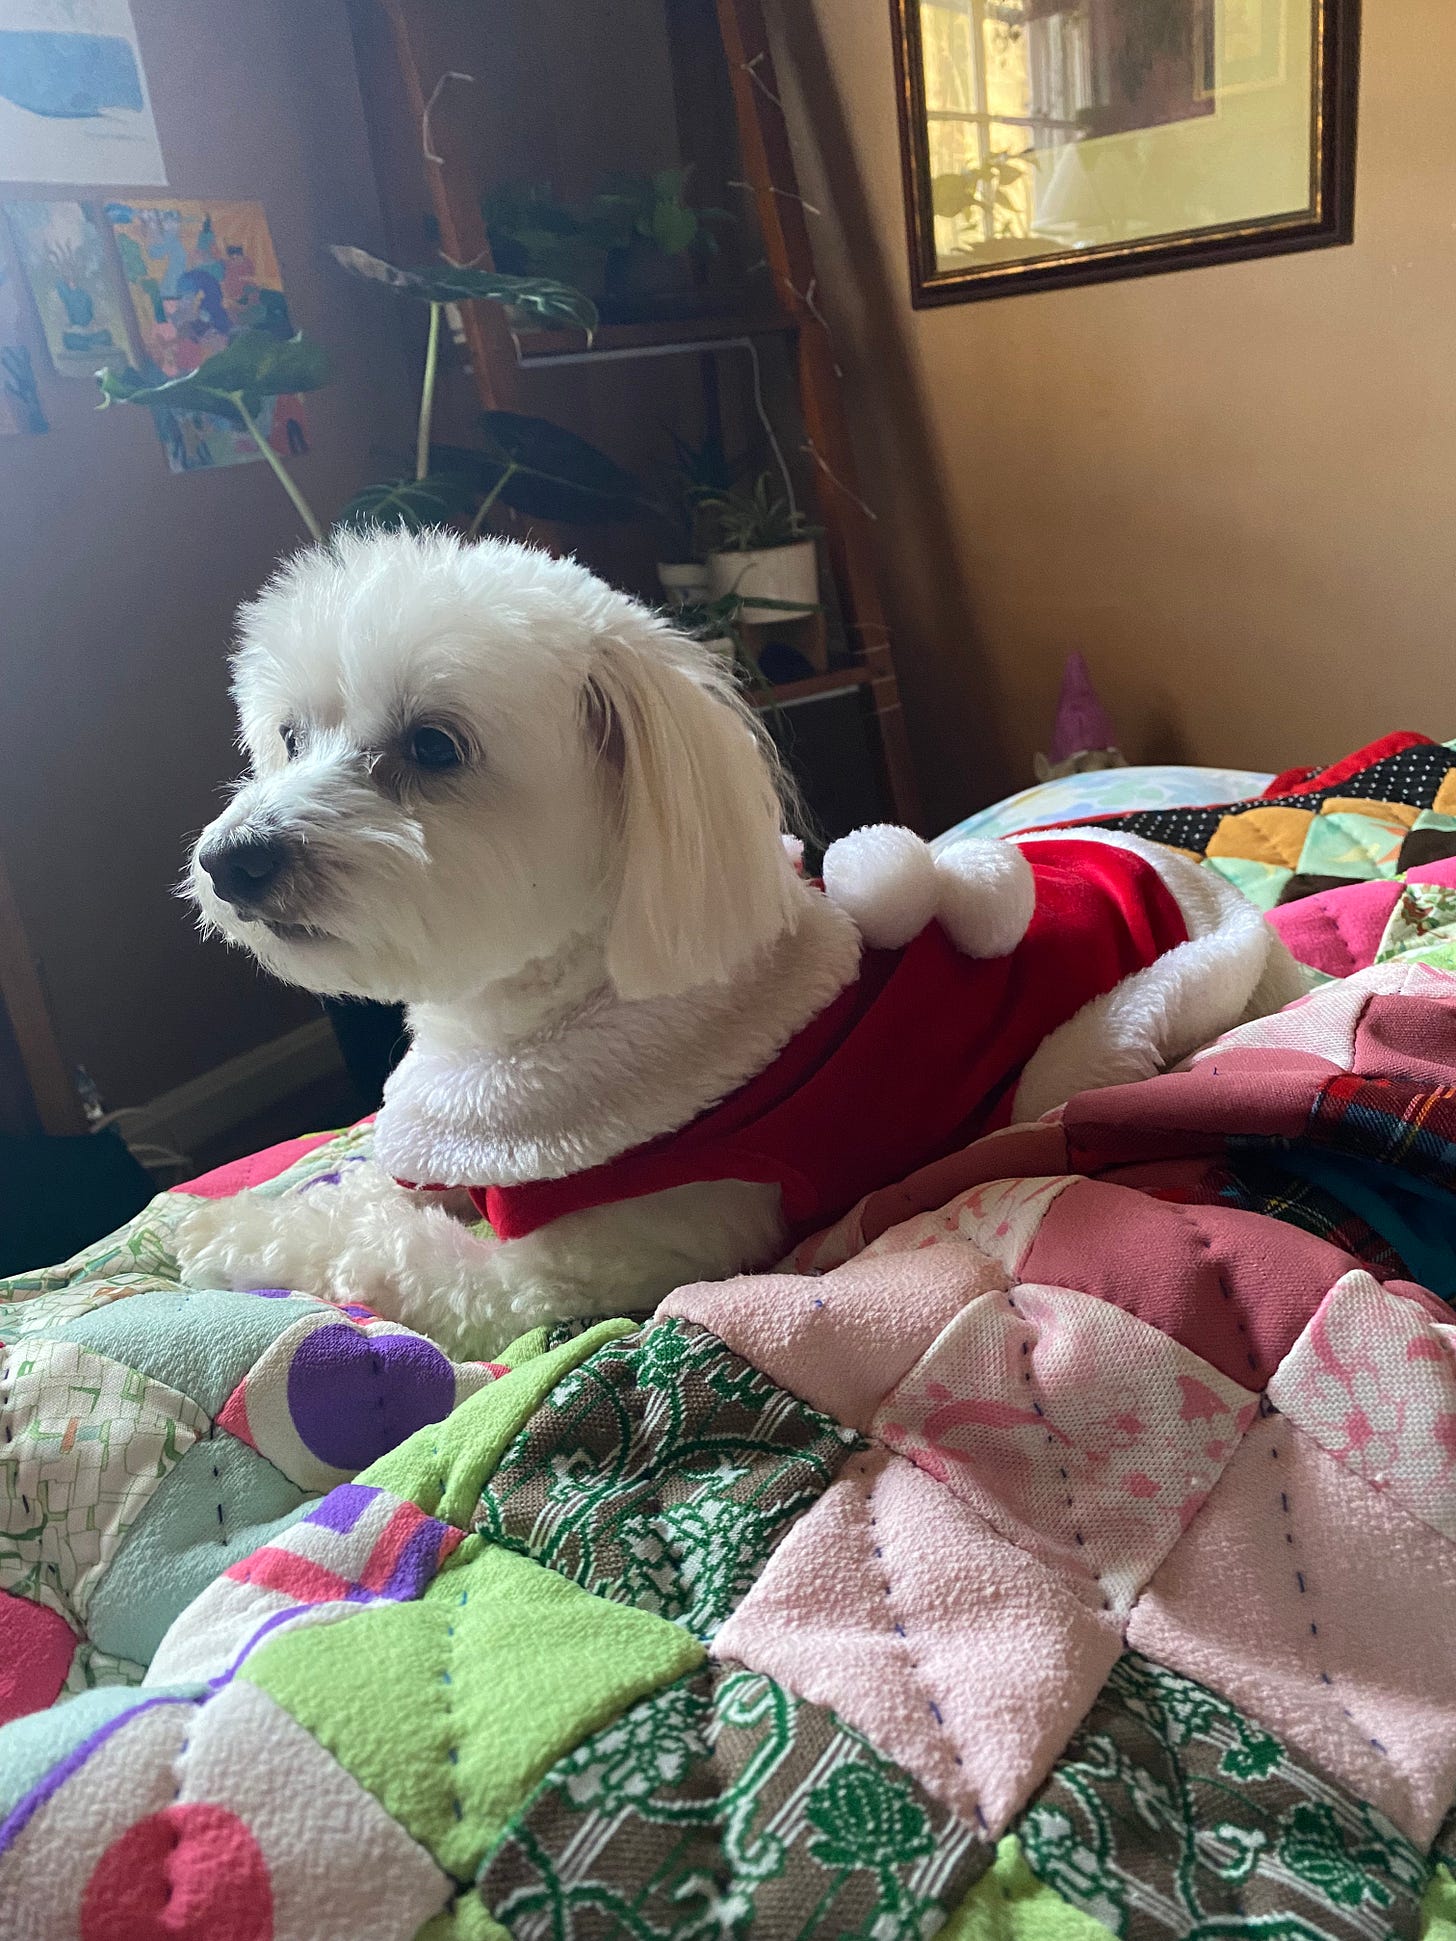 A small white dog in a Ms. Claus costume laying on a quilt.